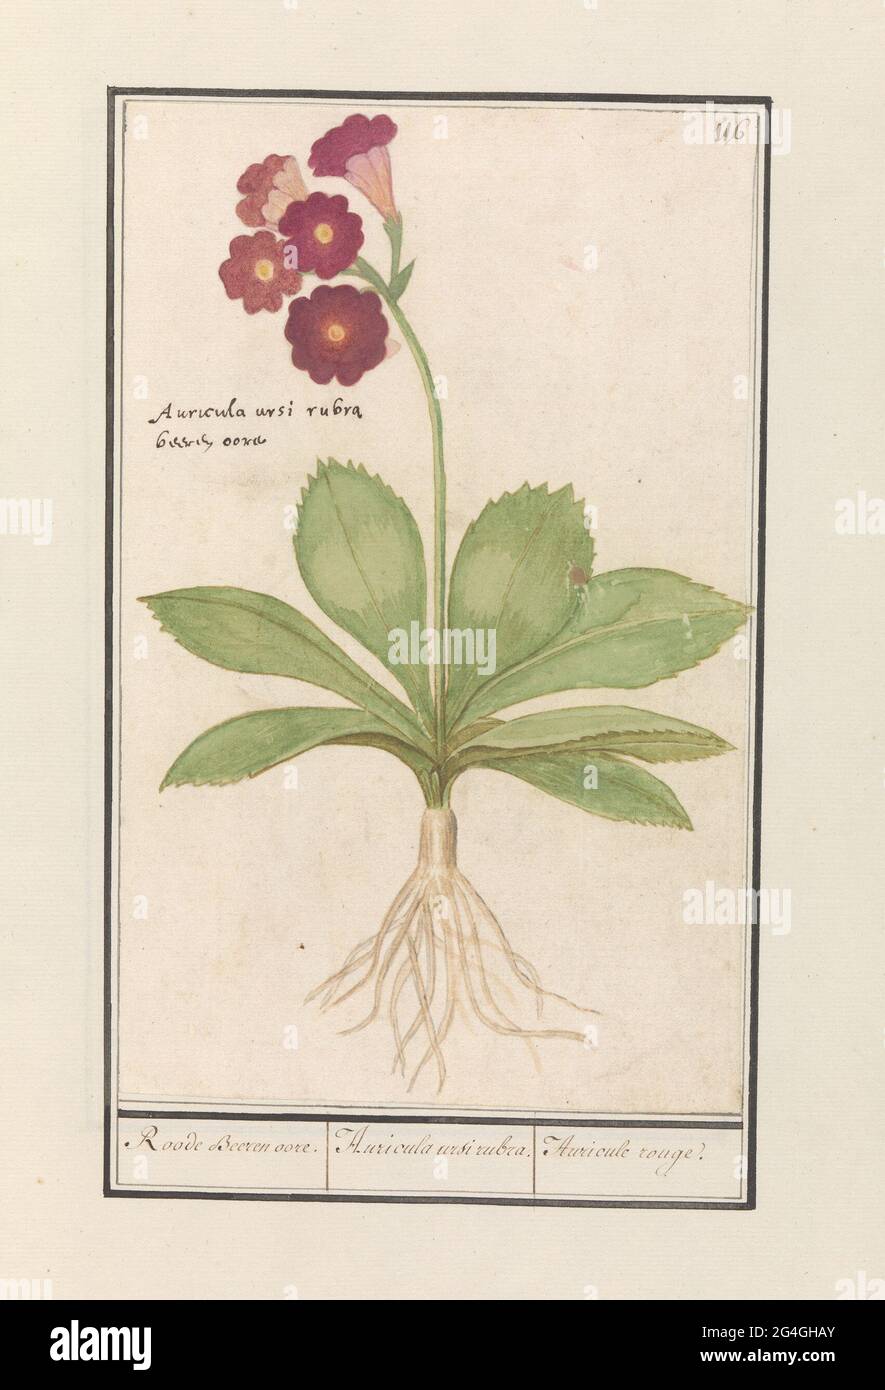 Primrose (primula); Roode Beeren Eare. / Auricula Ursi Rubra. / Auricule Rouge. Jullyflower. At the top right numbered: 116. With the Latin names. Part of the second album with drawings of flowers and plants. Ninth of twelve albums with drawings of animals, birds and plants known around 1600, made by Emperor Rudolf II. With explanation in Dutch, Latin and French. Stock Photo